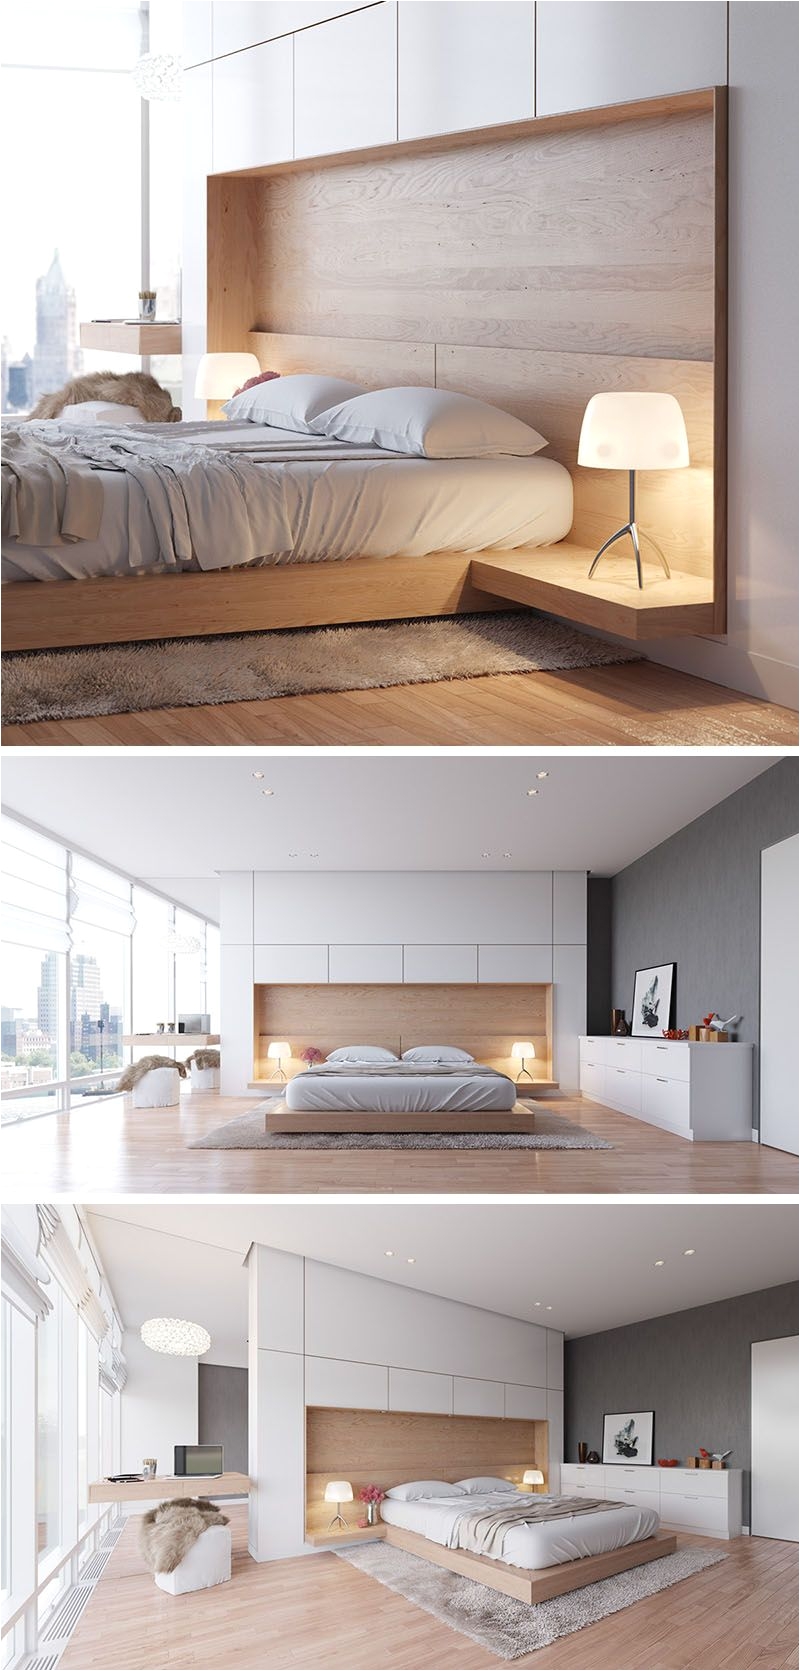 bedroom design idea combine your bed and side table into one